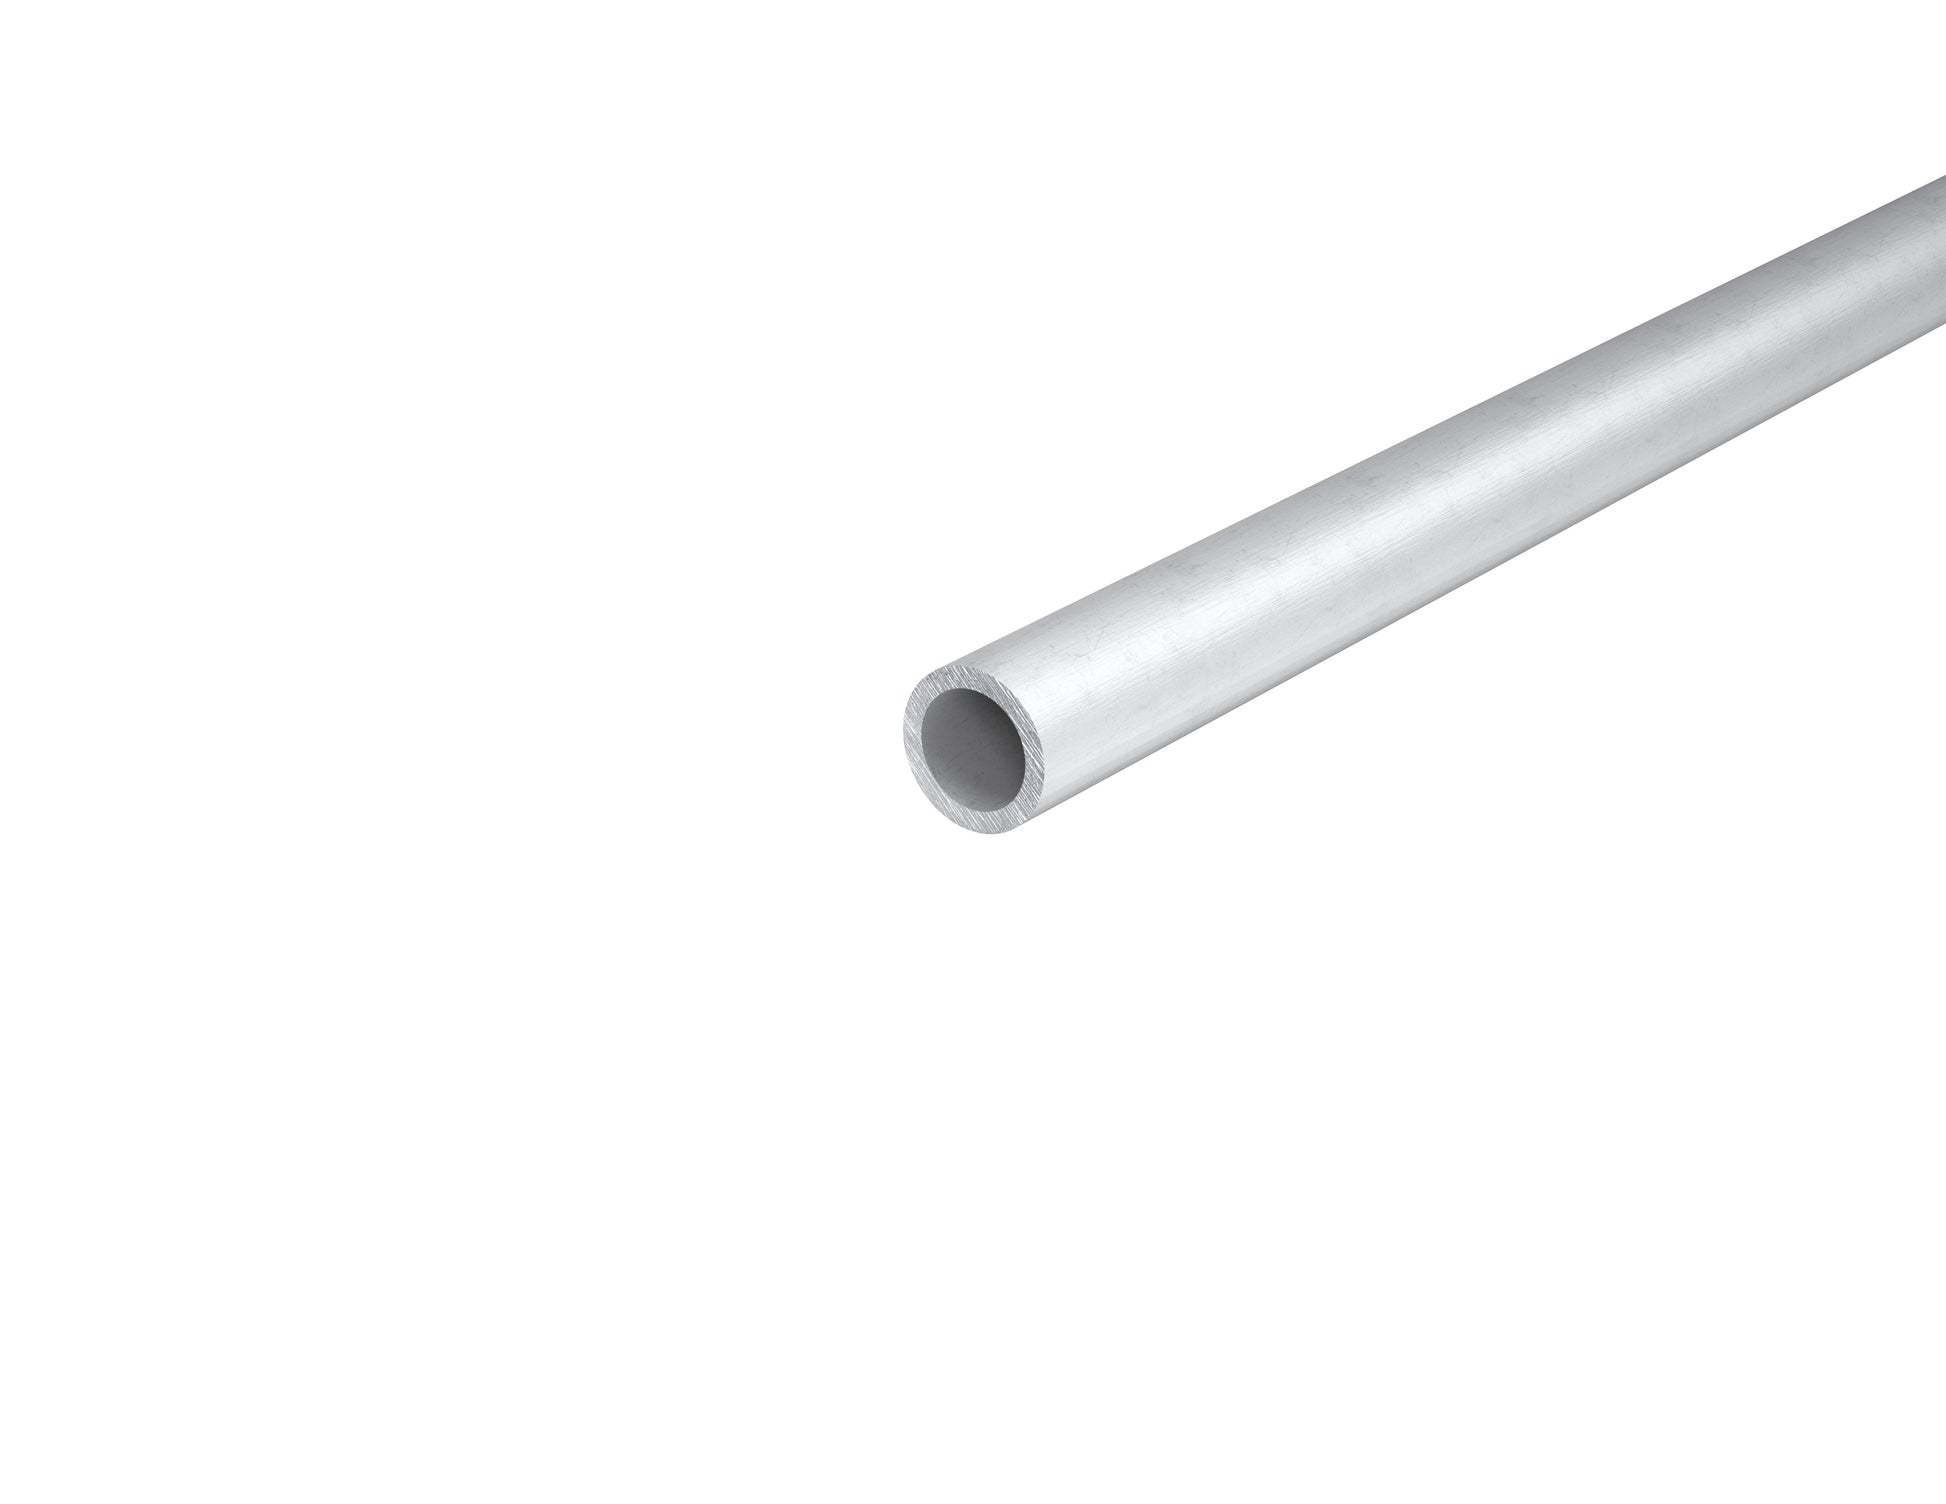 1.022" OD x 0.136" Wall Extruded Round Aluminum Tube 6063-T6 Approximately 1" OD x 1/8" wall